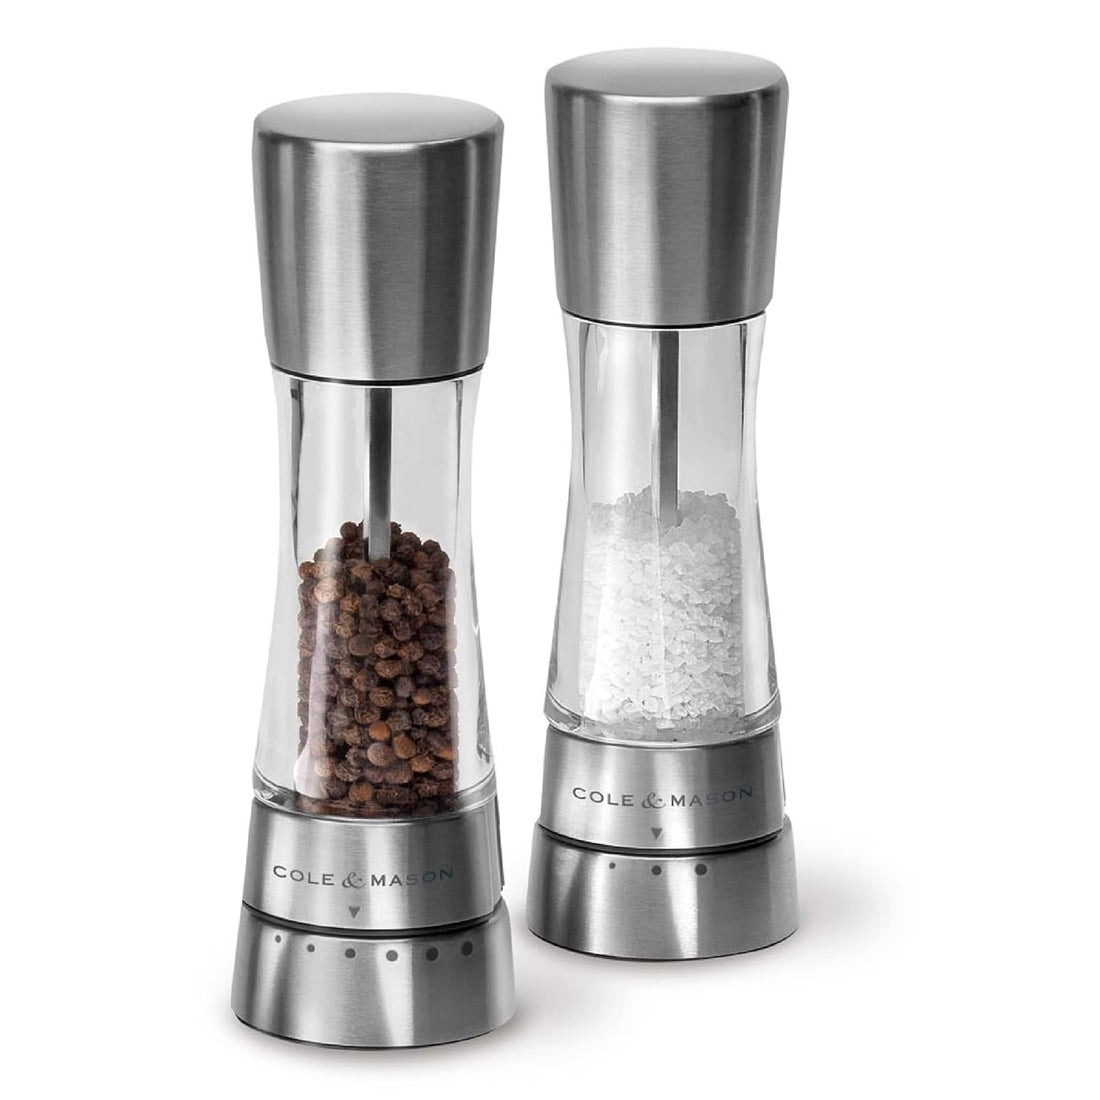 Cole & Mason Derwent Salt and Pepper Grinder Set with Gift Box - Mills include Salt and Pepper